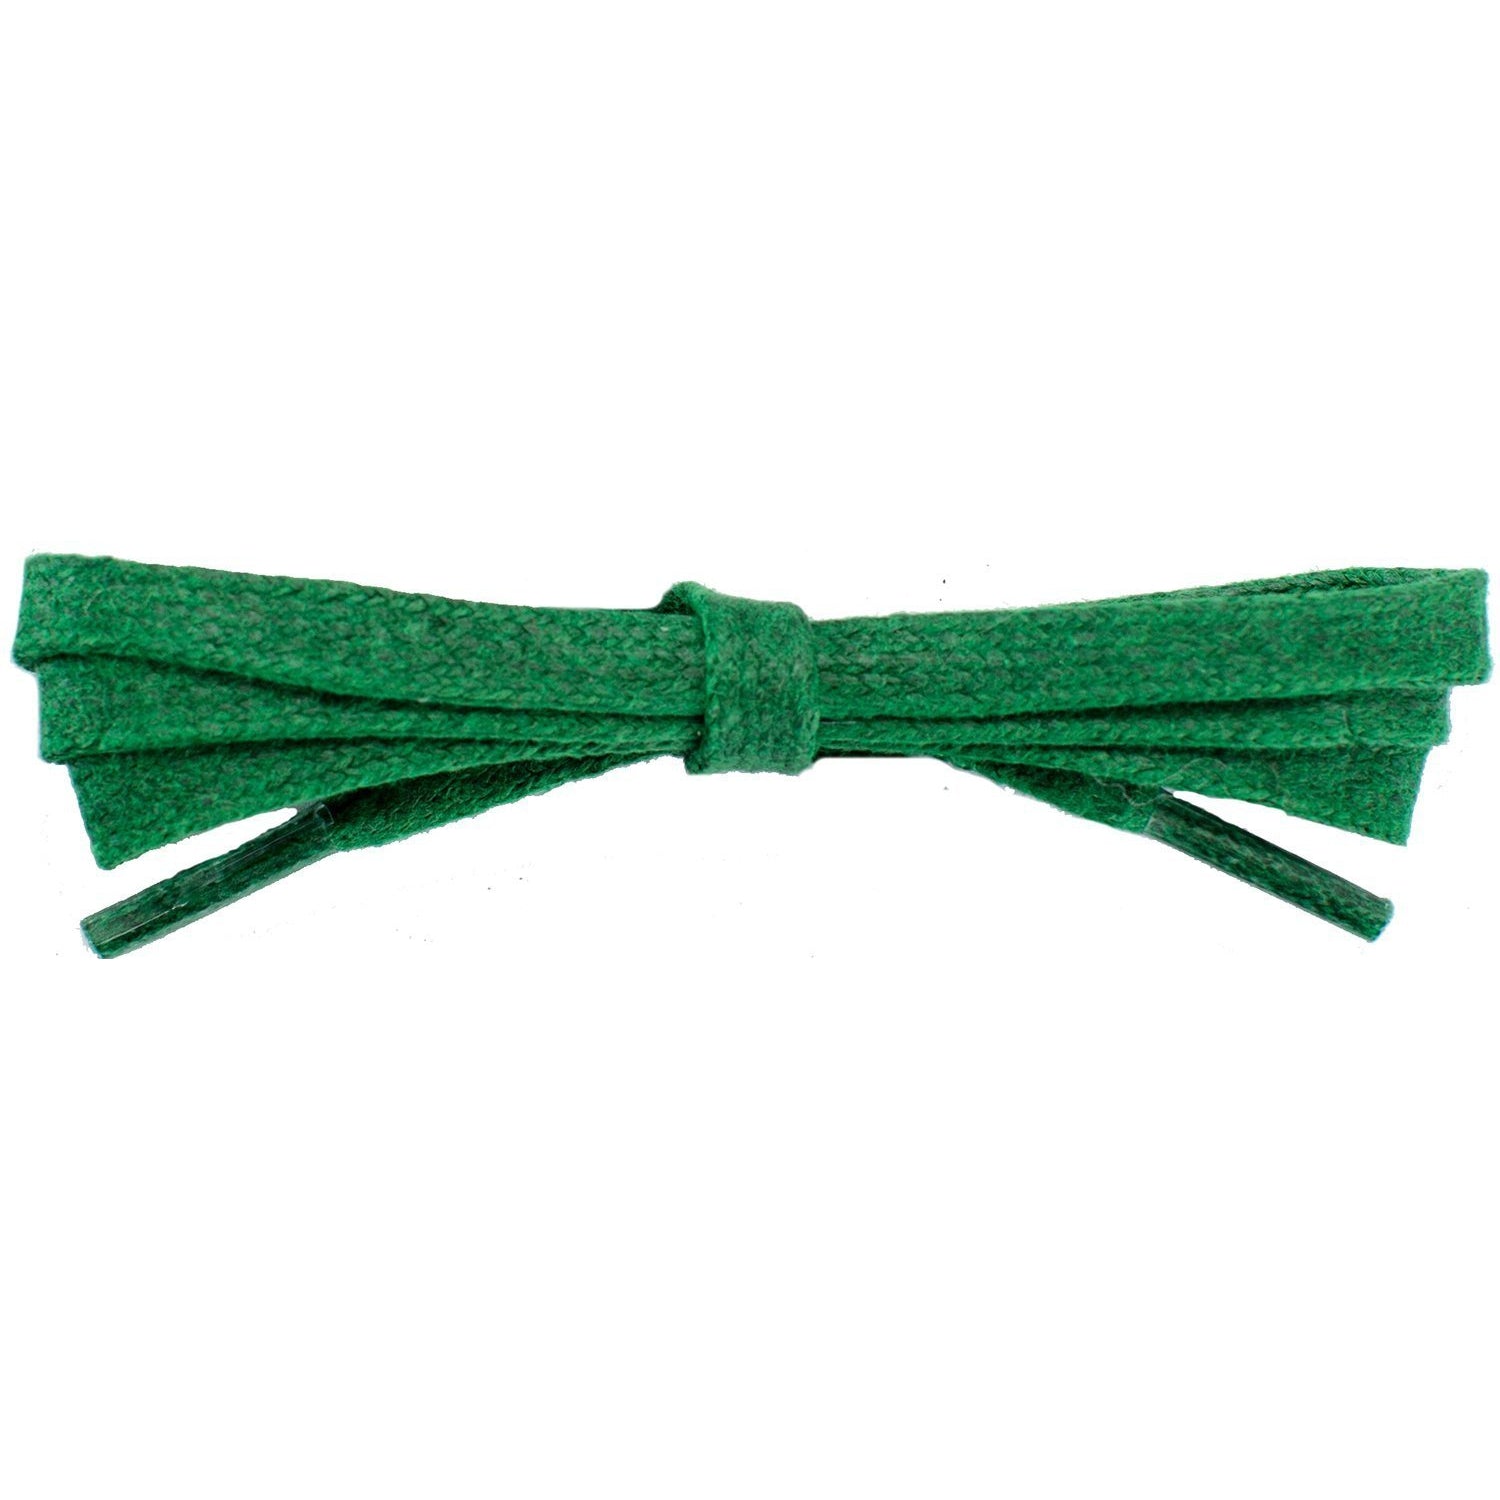 Wholesale Waxed Cotton Flat DRESS Laces 1/4'' - Kelly Green (12 Pair Pack) Shoelaces